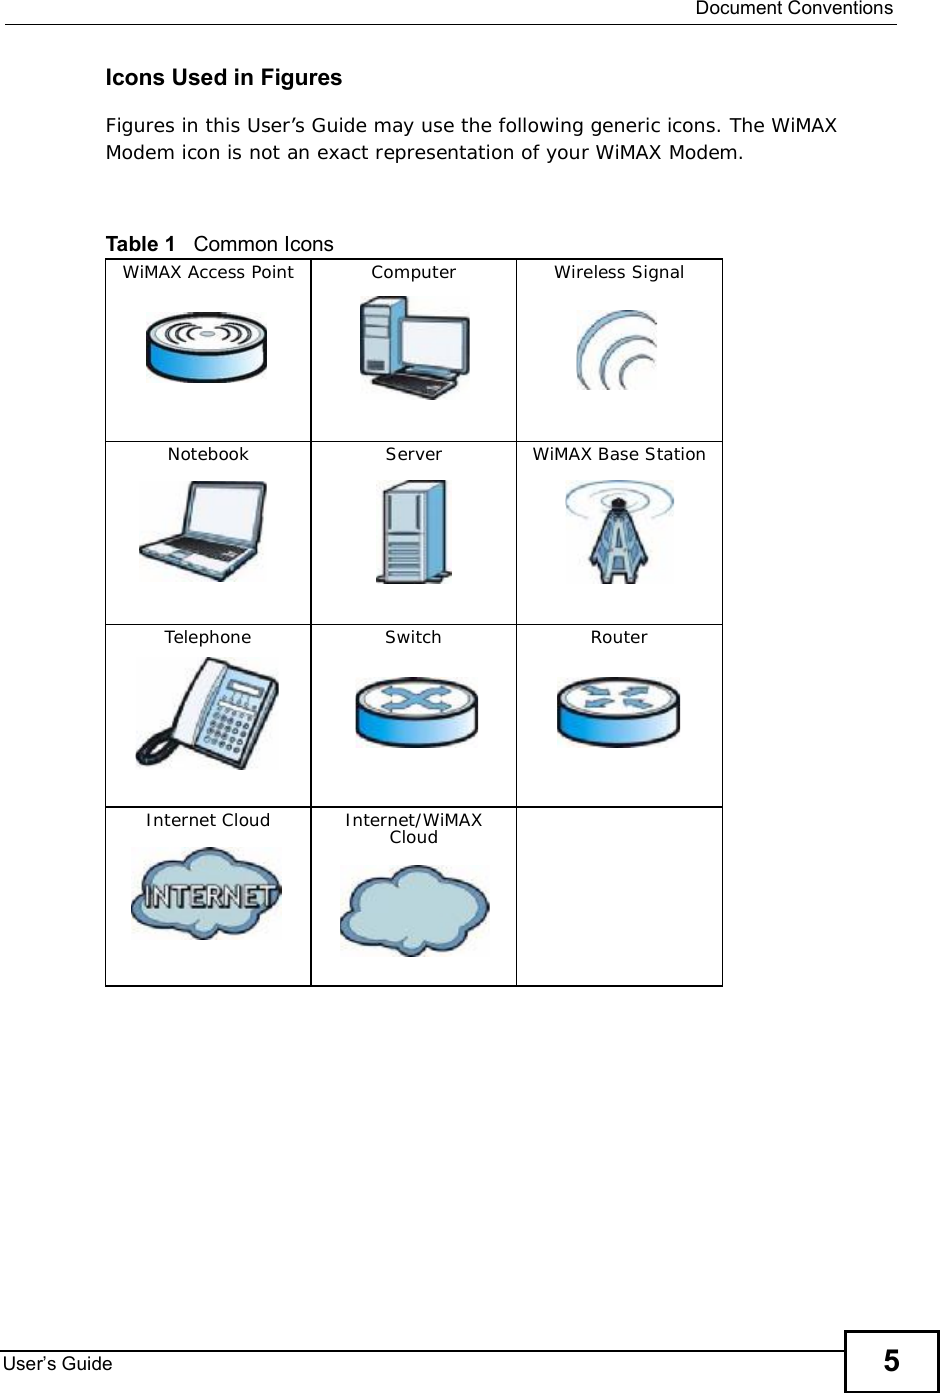  Document ConventionsUser s Guide 5Icons Used in FiguresFigures in this User’s Guide may use the following generic icons. The WiMAX Modem icon is not an exact representation of your WiMAX Modem.Table 1   Common IconsWiMAX Access PointComputerWireless SignalNotebookServerWiMAX Base StationTelephoneSwitchRouterInternet CloudInternet/WiMAX Cloud